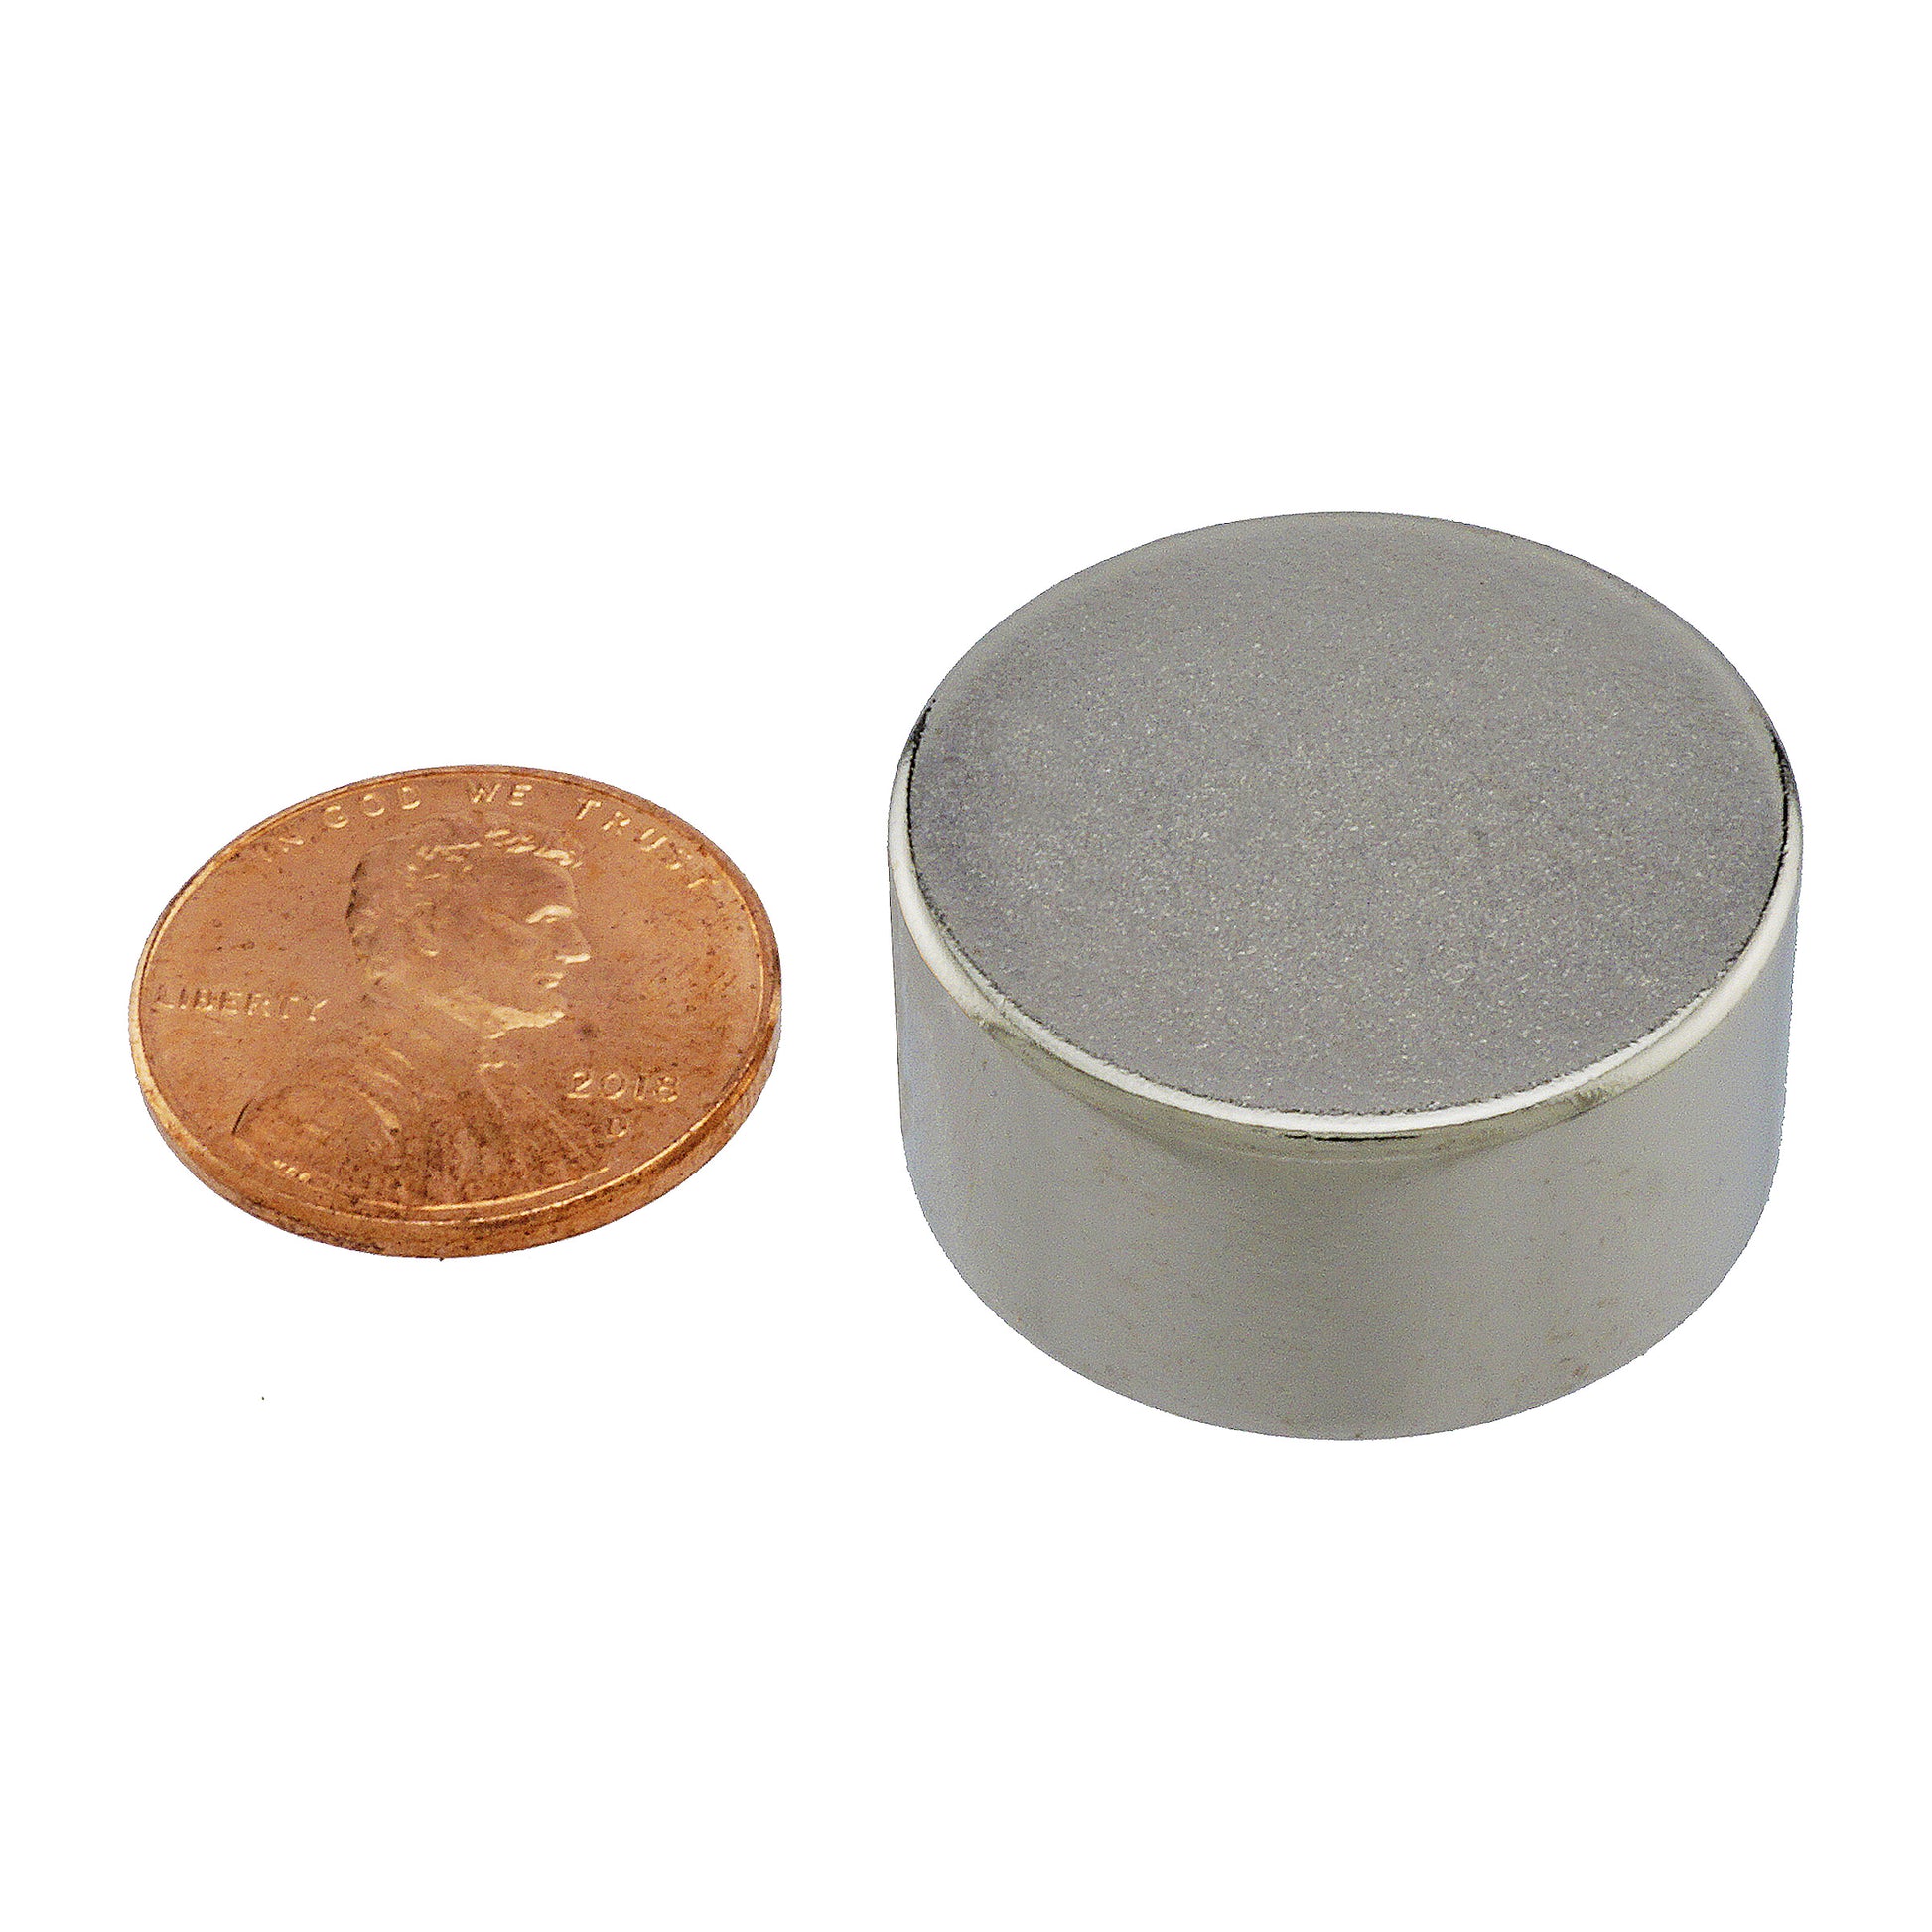 Load image into Gallery viewer, ND025N-35 Neodymium Disc Magnet - Compared to Penny for Size Reference